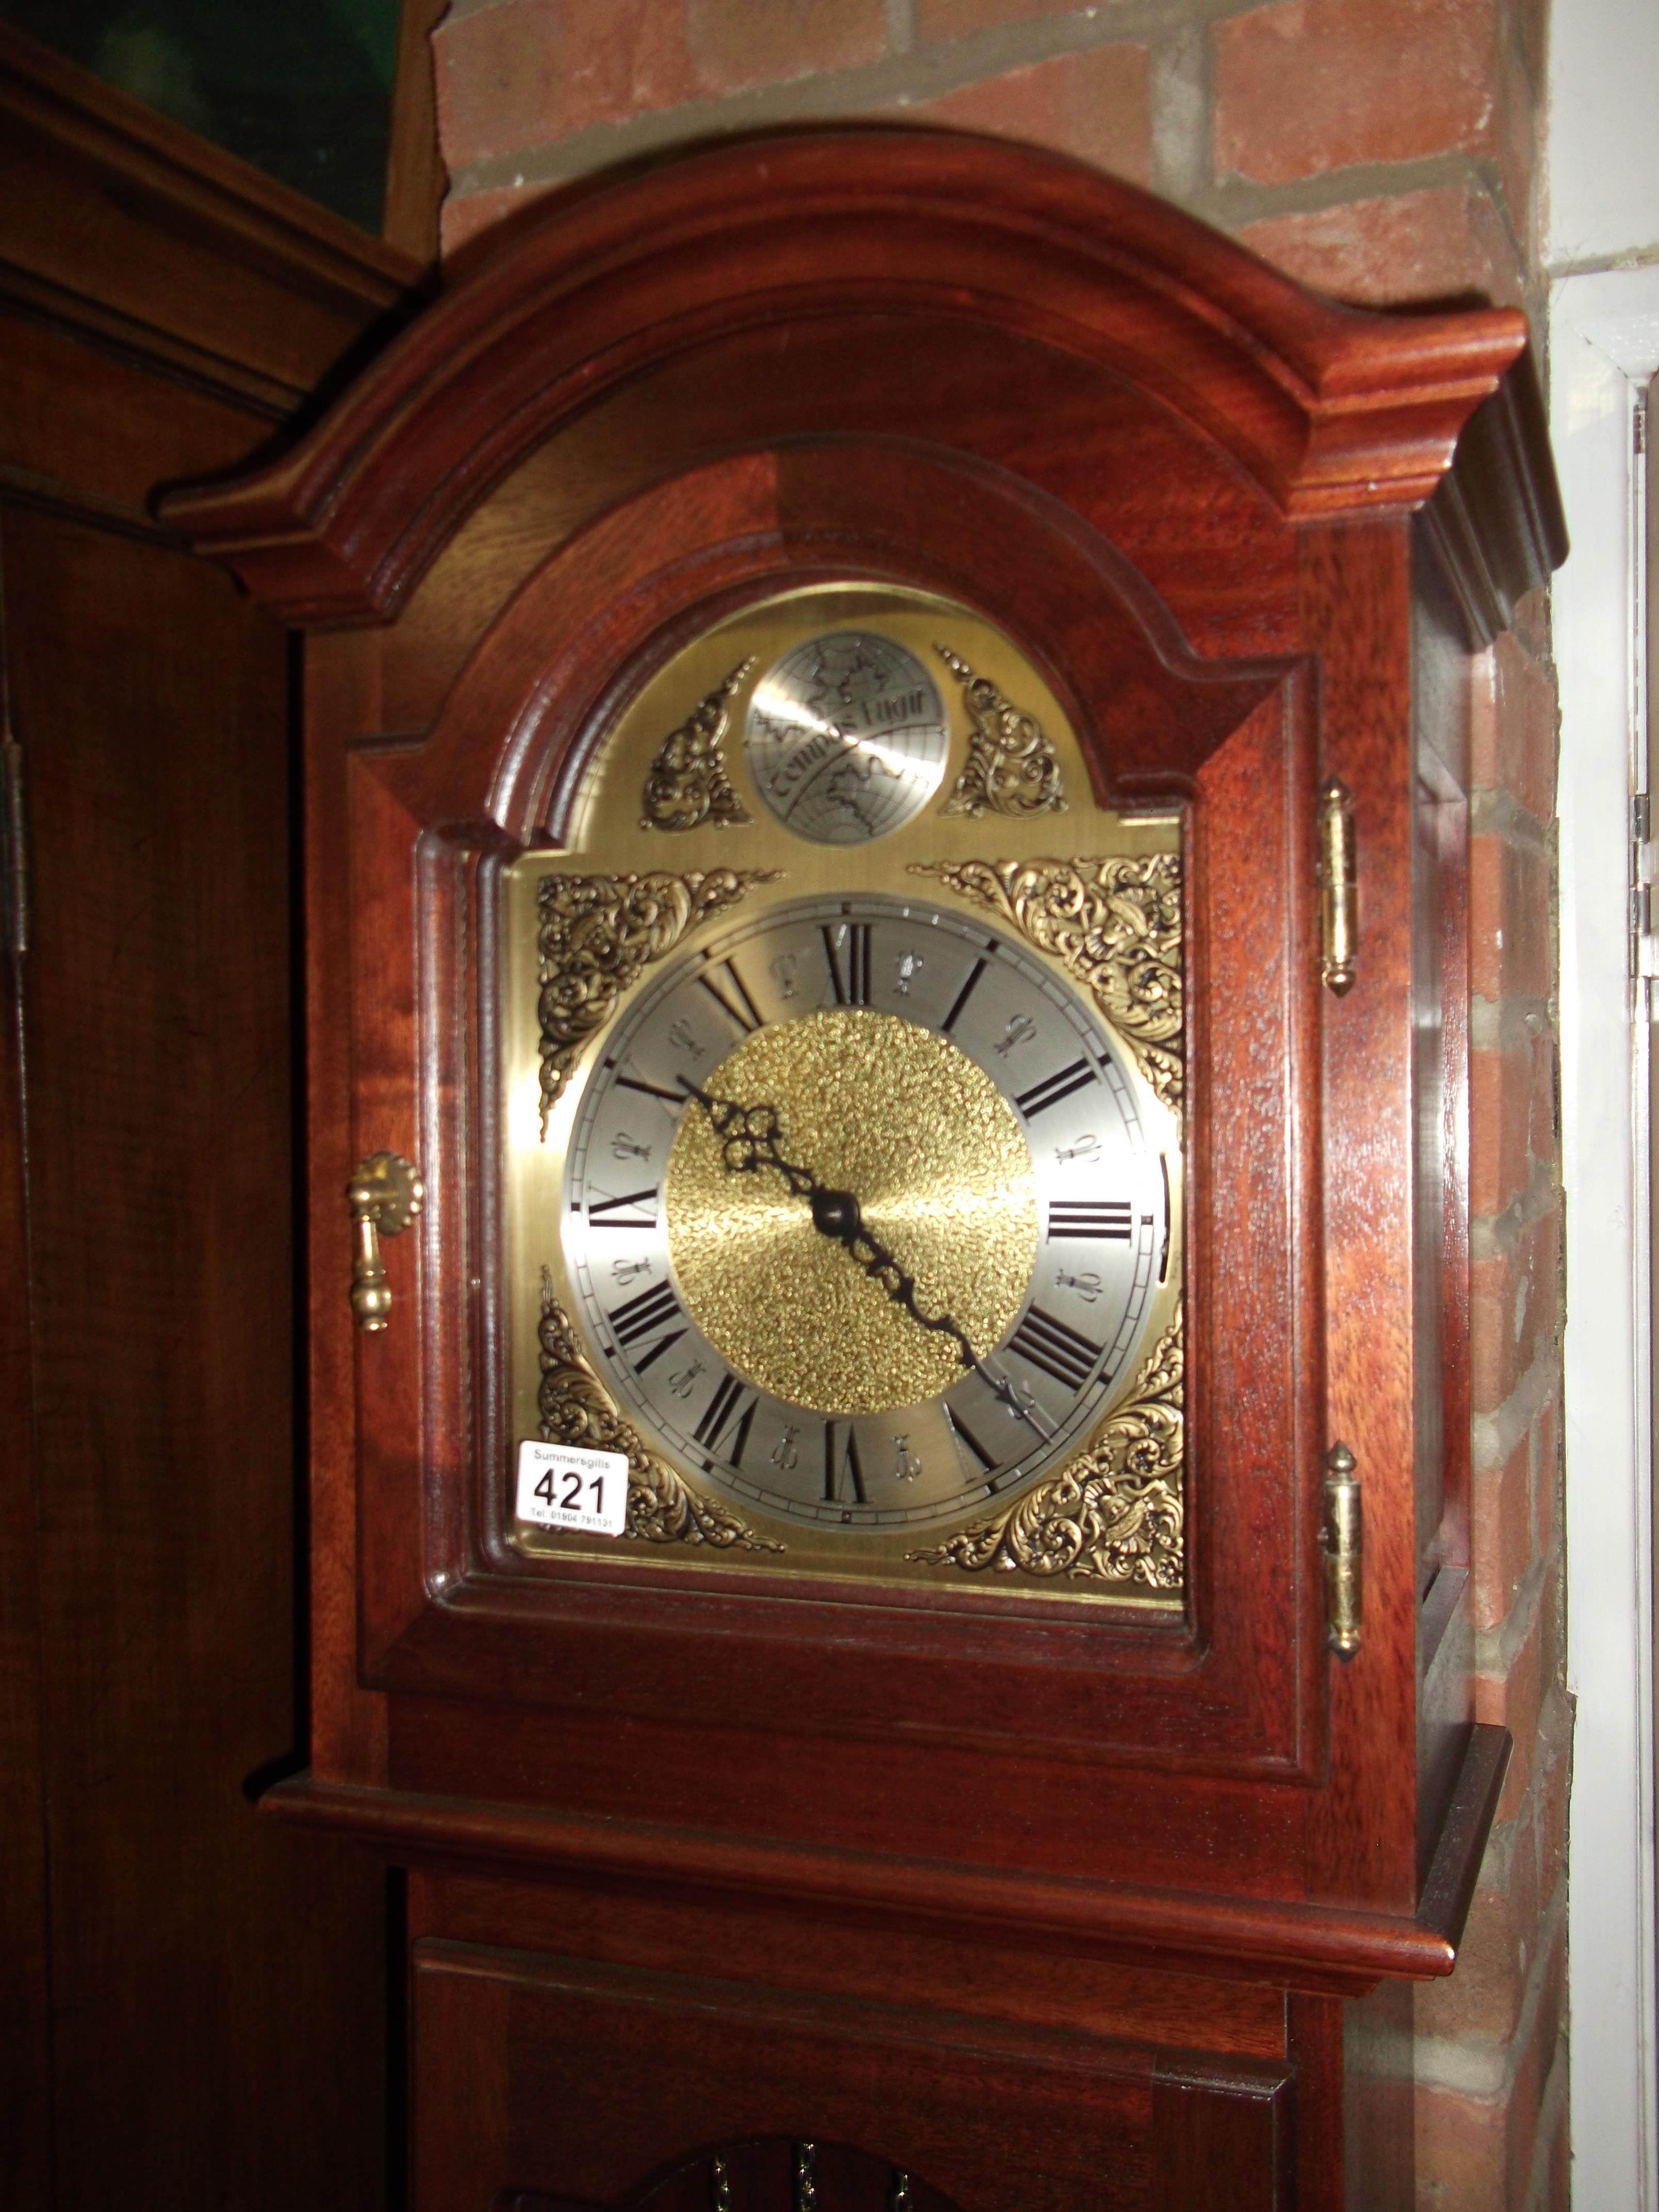 Reproduction Grandfather clock